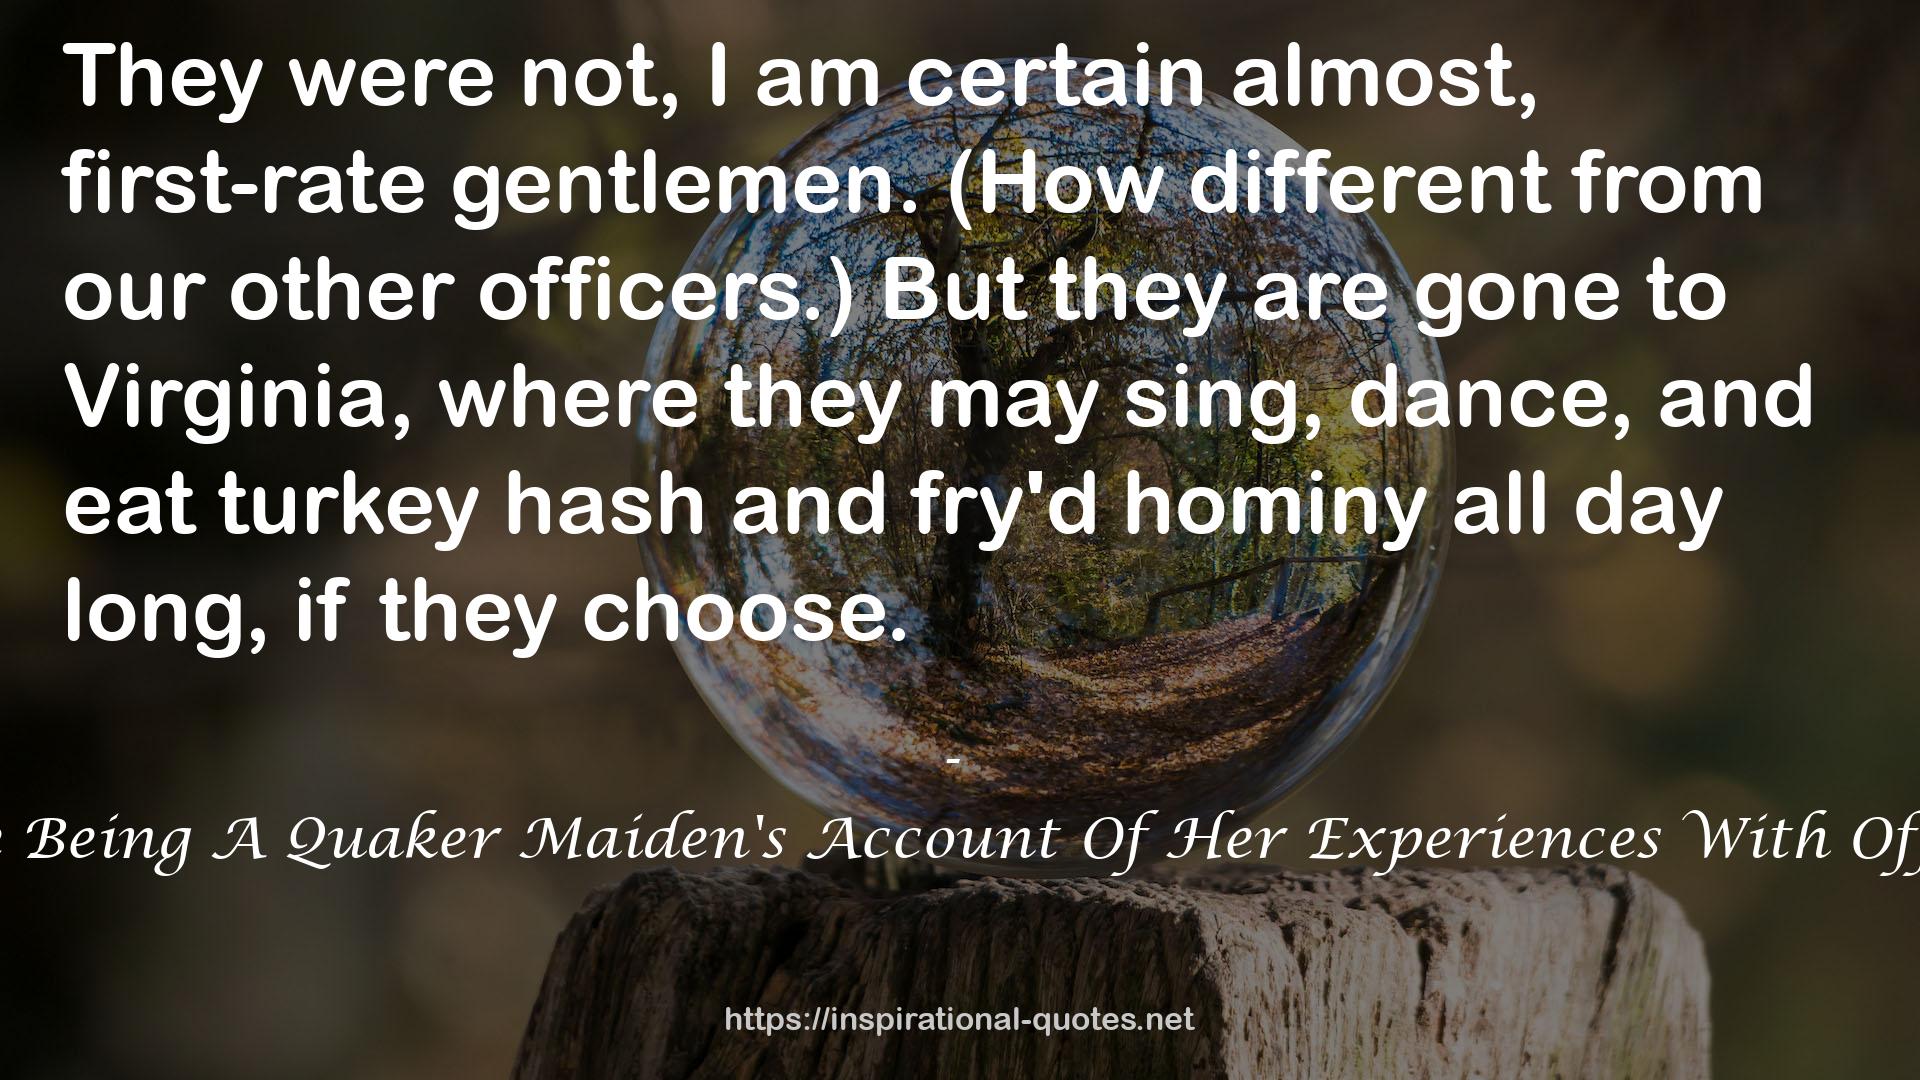 Sally Wister's Journal: A True Narrative Being A Quaker Maiden's Account Of Her Experiences With Officers Of The Continental Army, 1777-1778 QUOTES